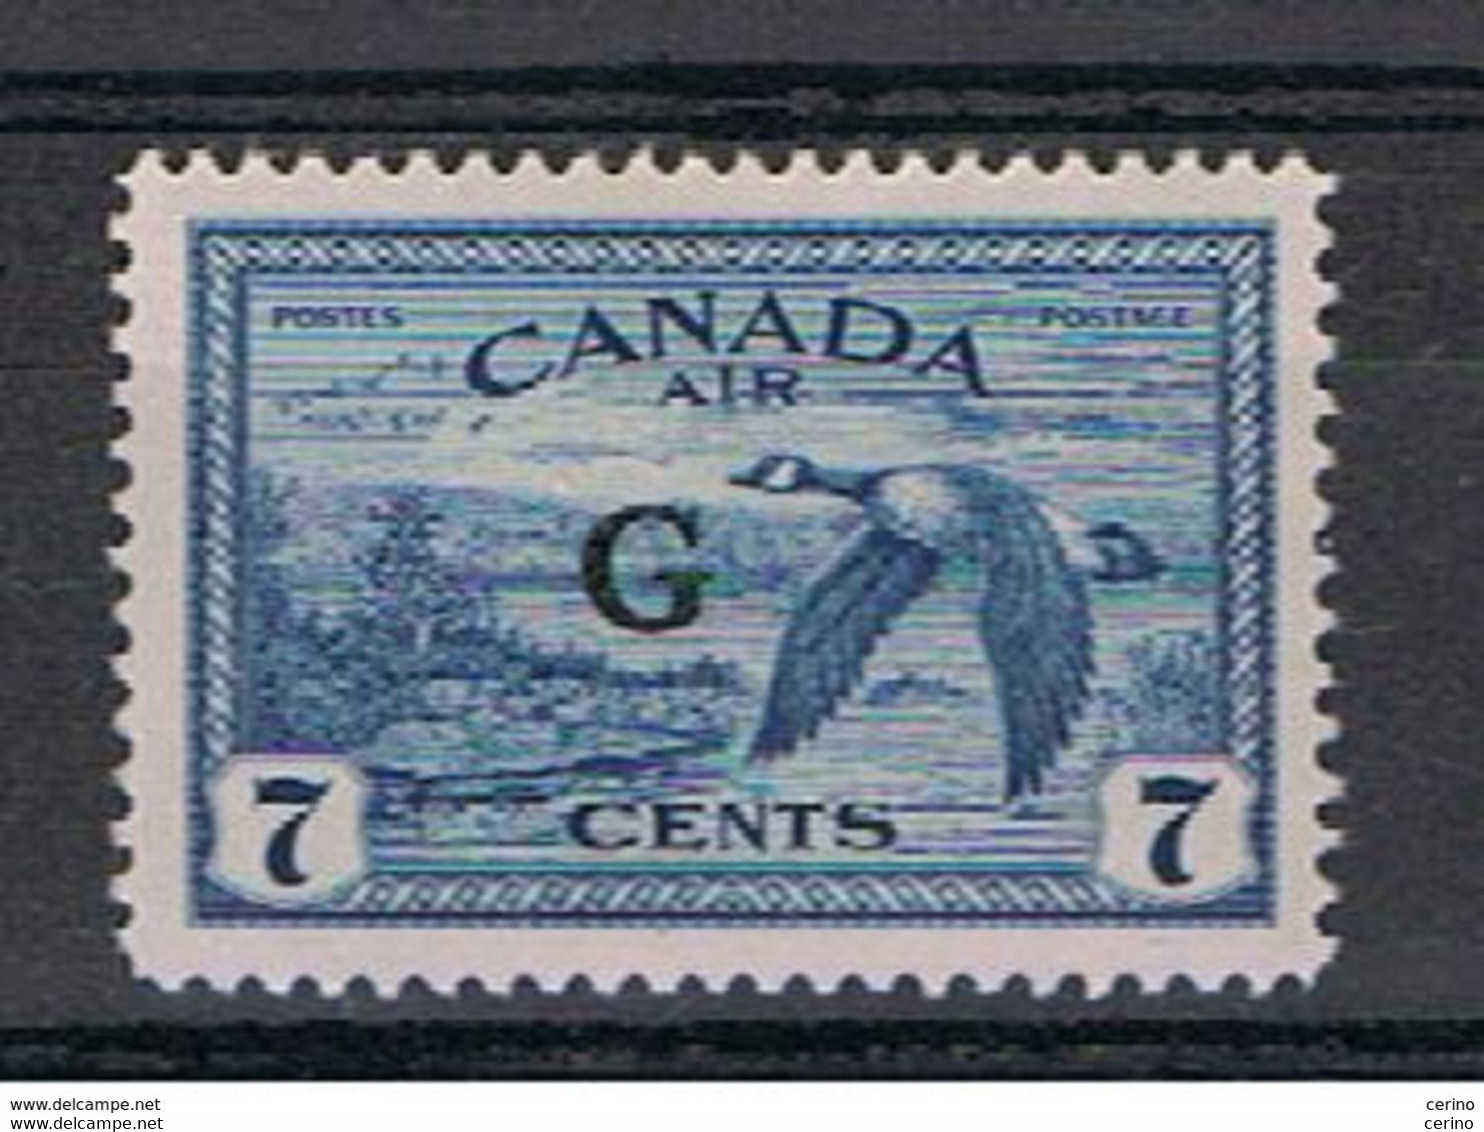 CANADA:  1950/52  OFFICIALS  OVERPRINT  -  7 C. UNUSED  STAMP  -  YV/TELL. 28 - Overprinted